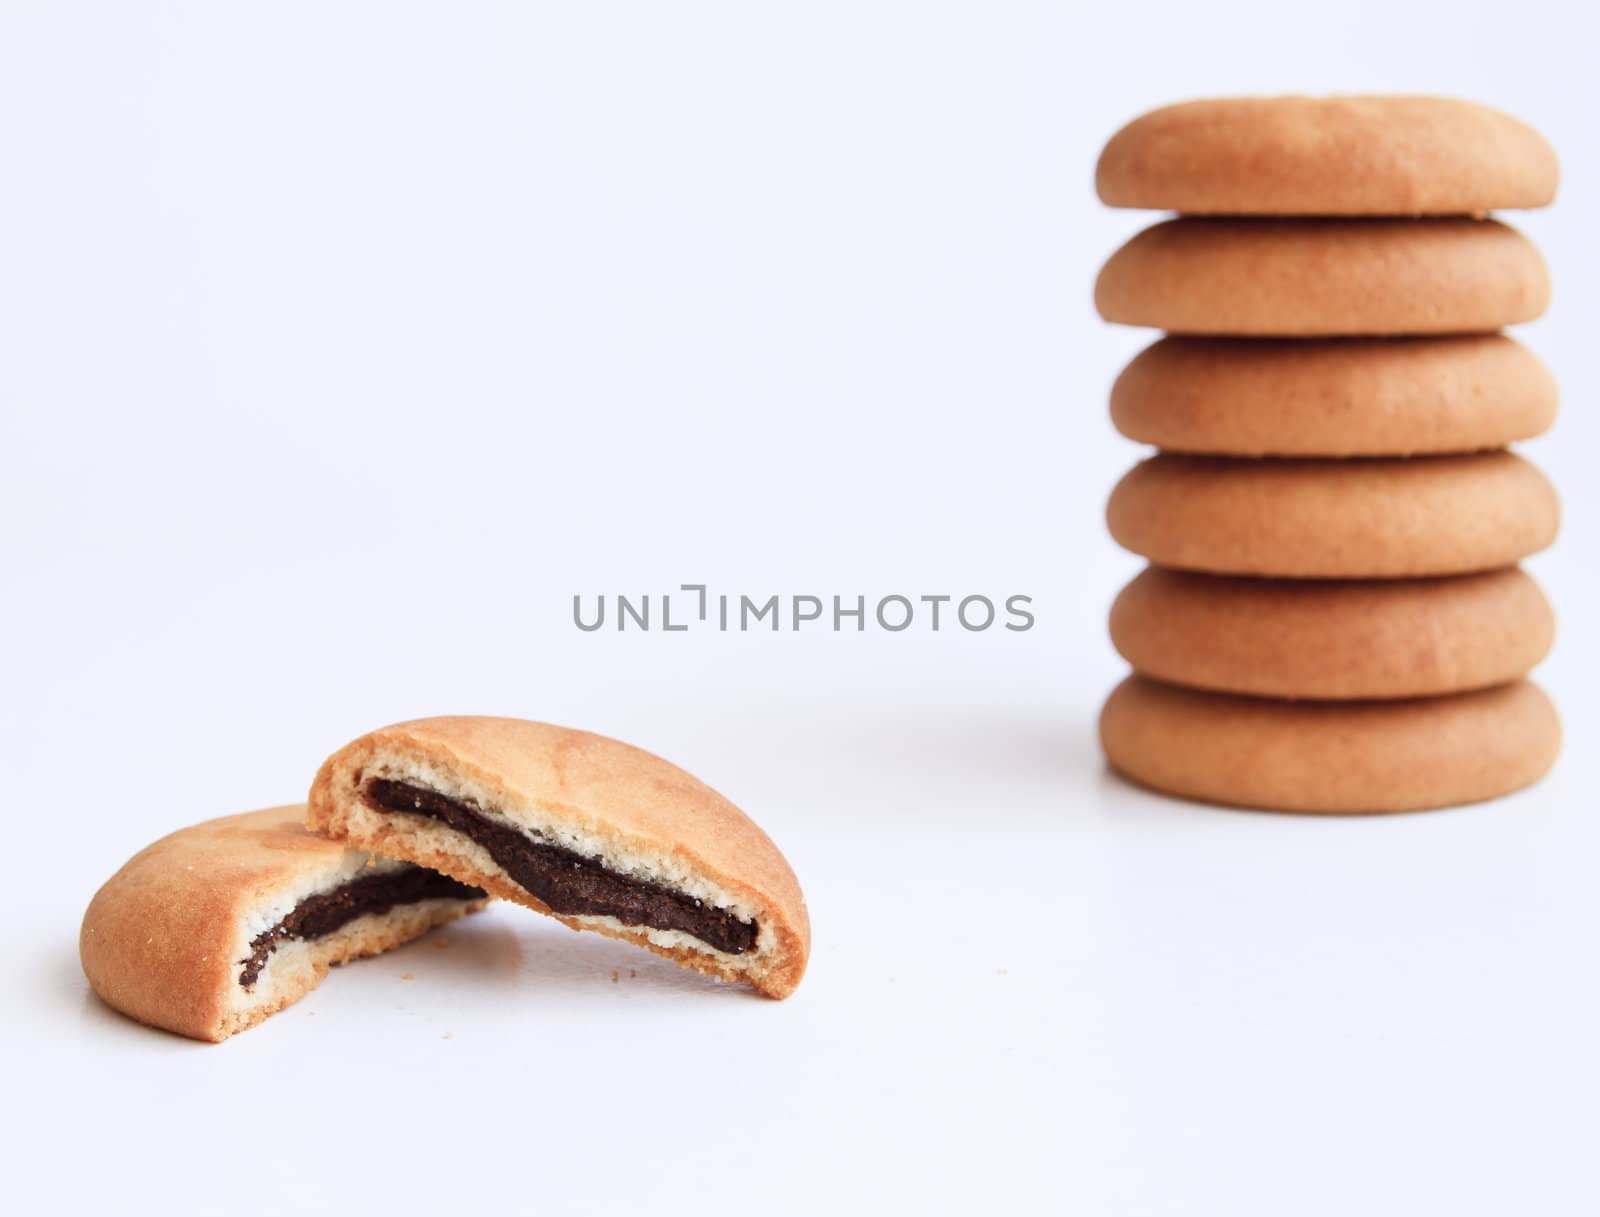 biscuits filled with chocolate cream isolated on white